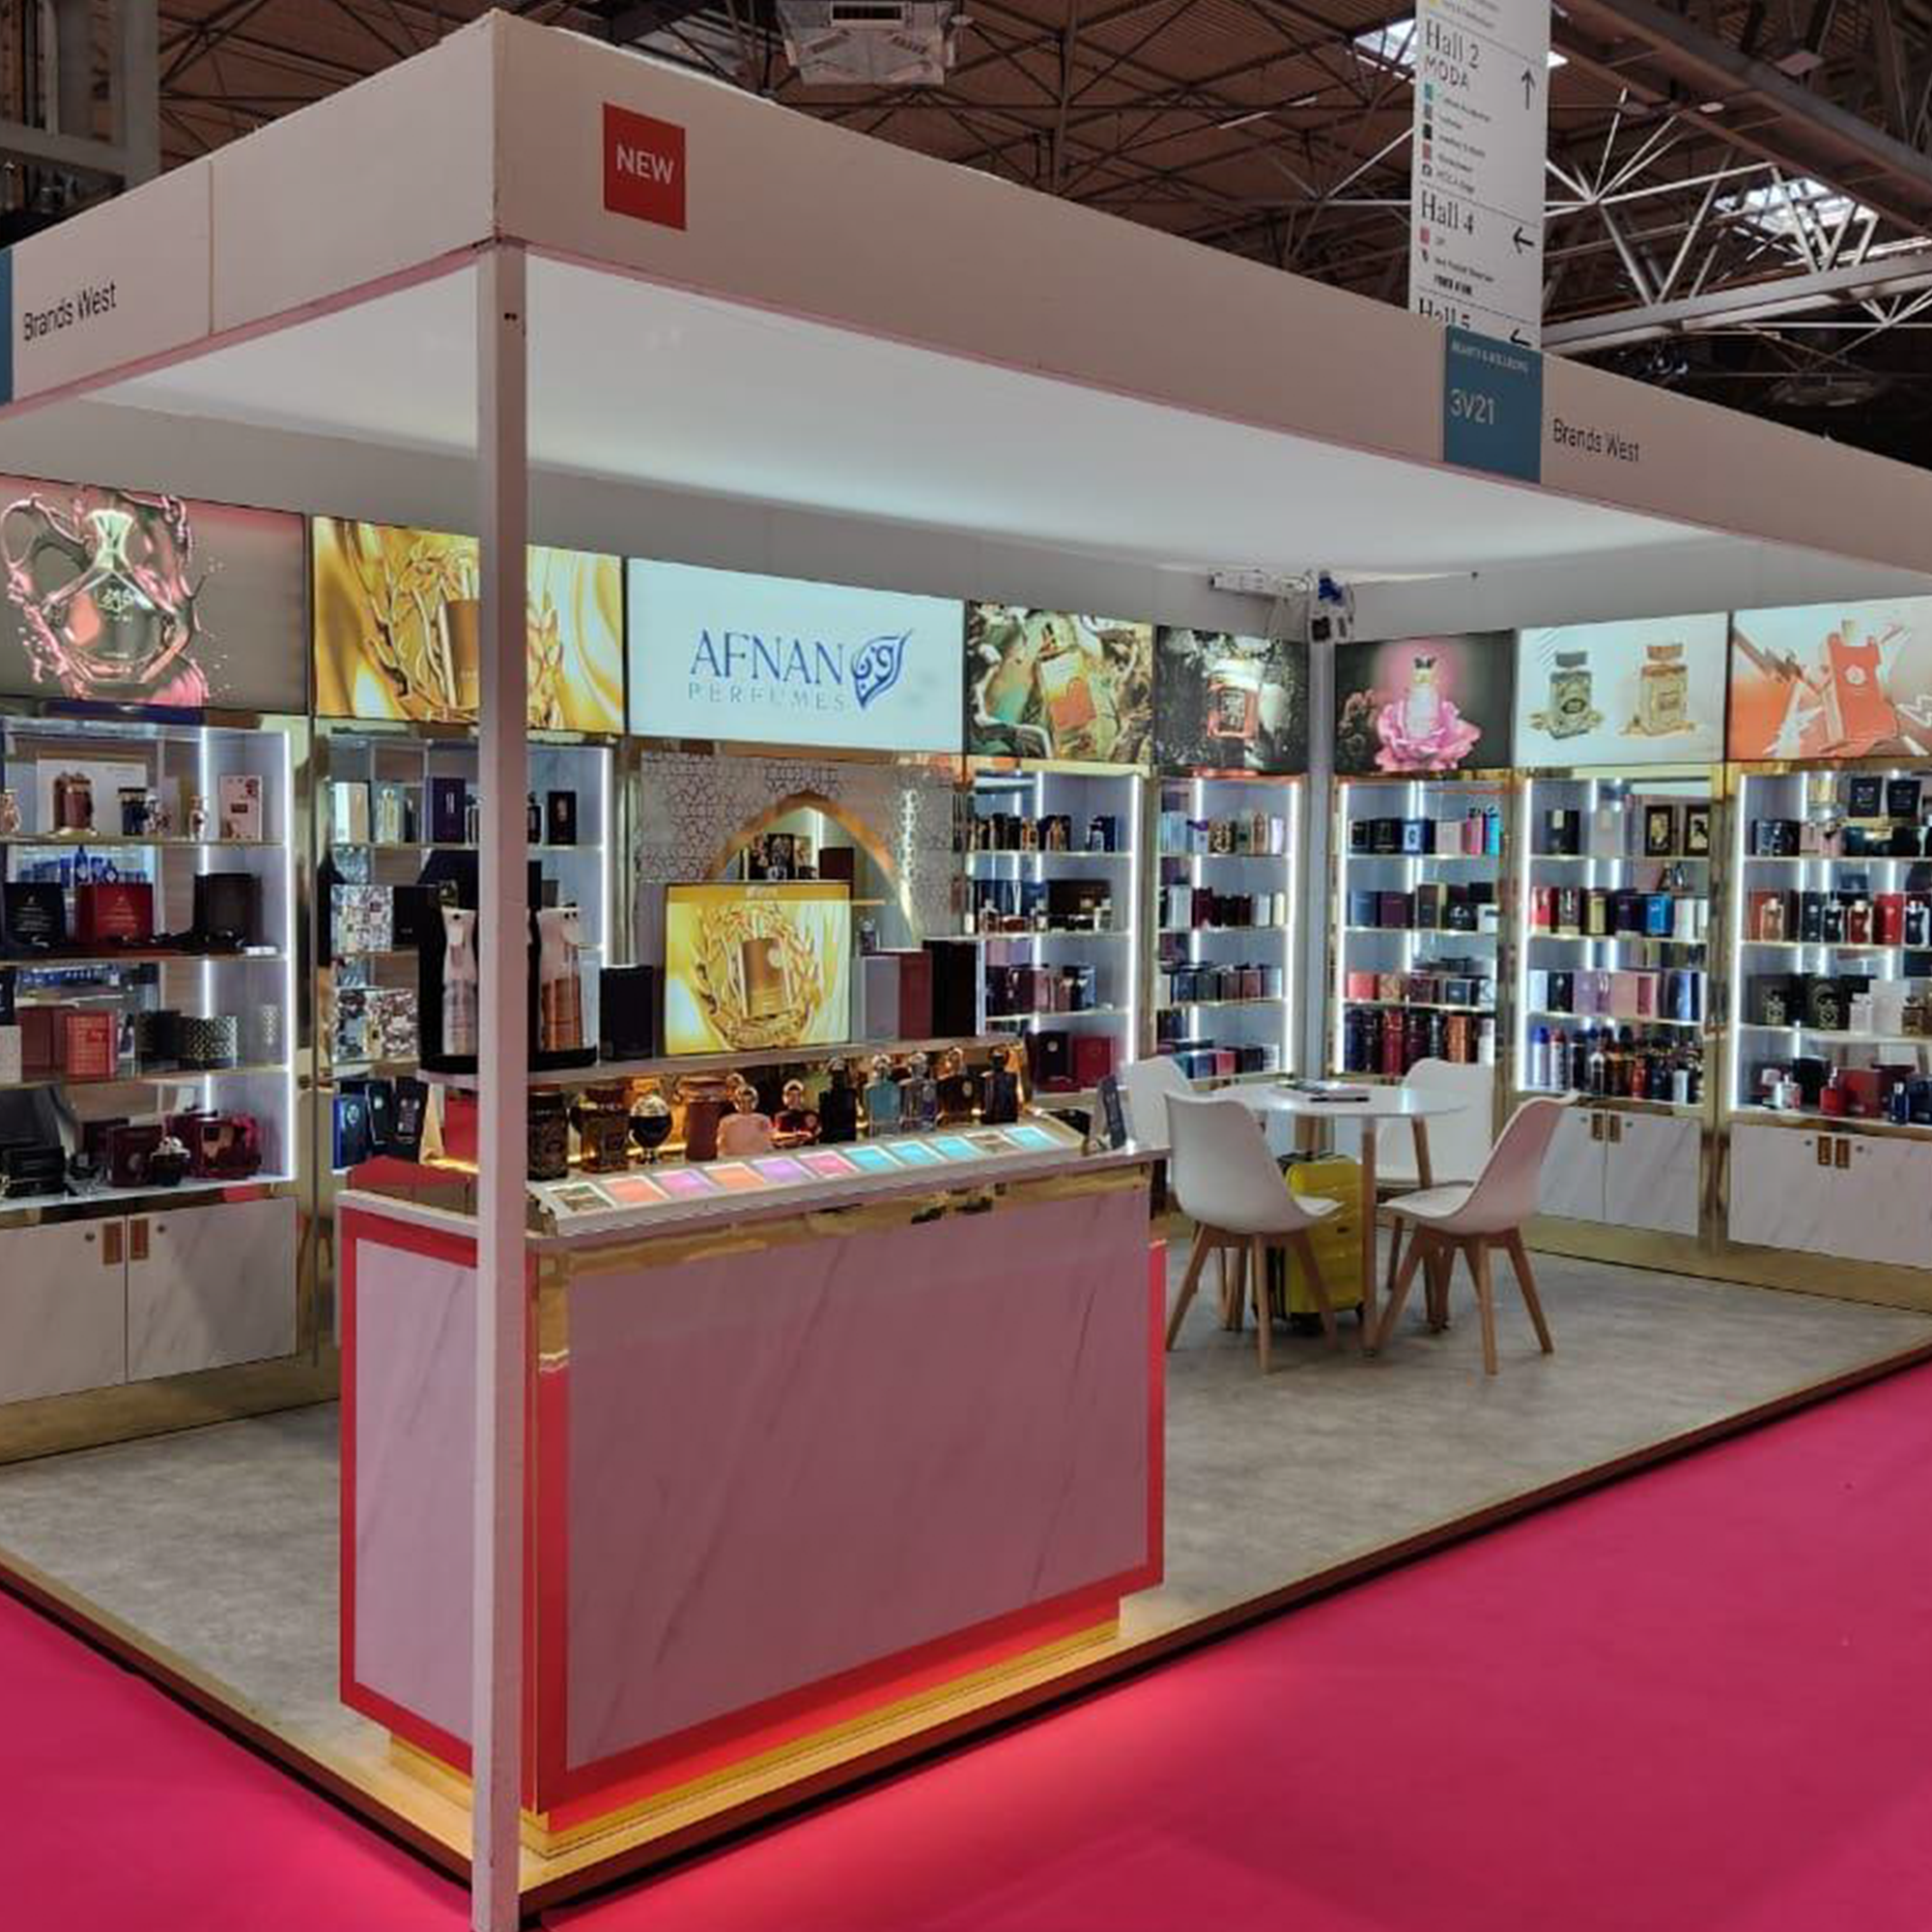 Brandswest Showcases Afnan Perfumes at the Spring Fair: A Wholesale Display